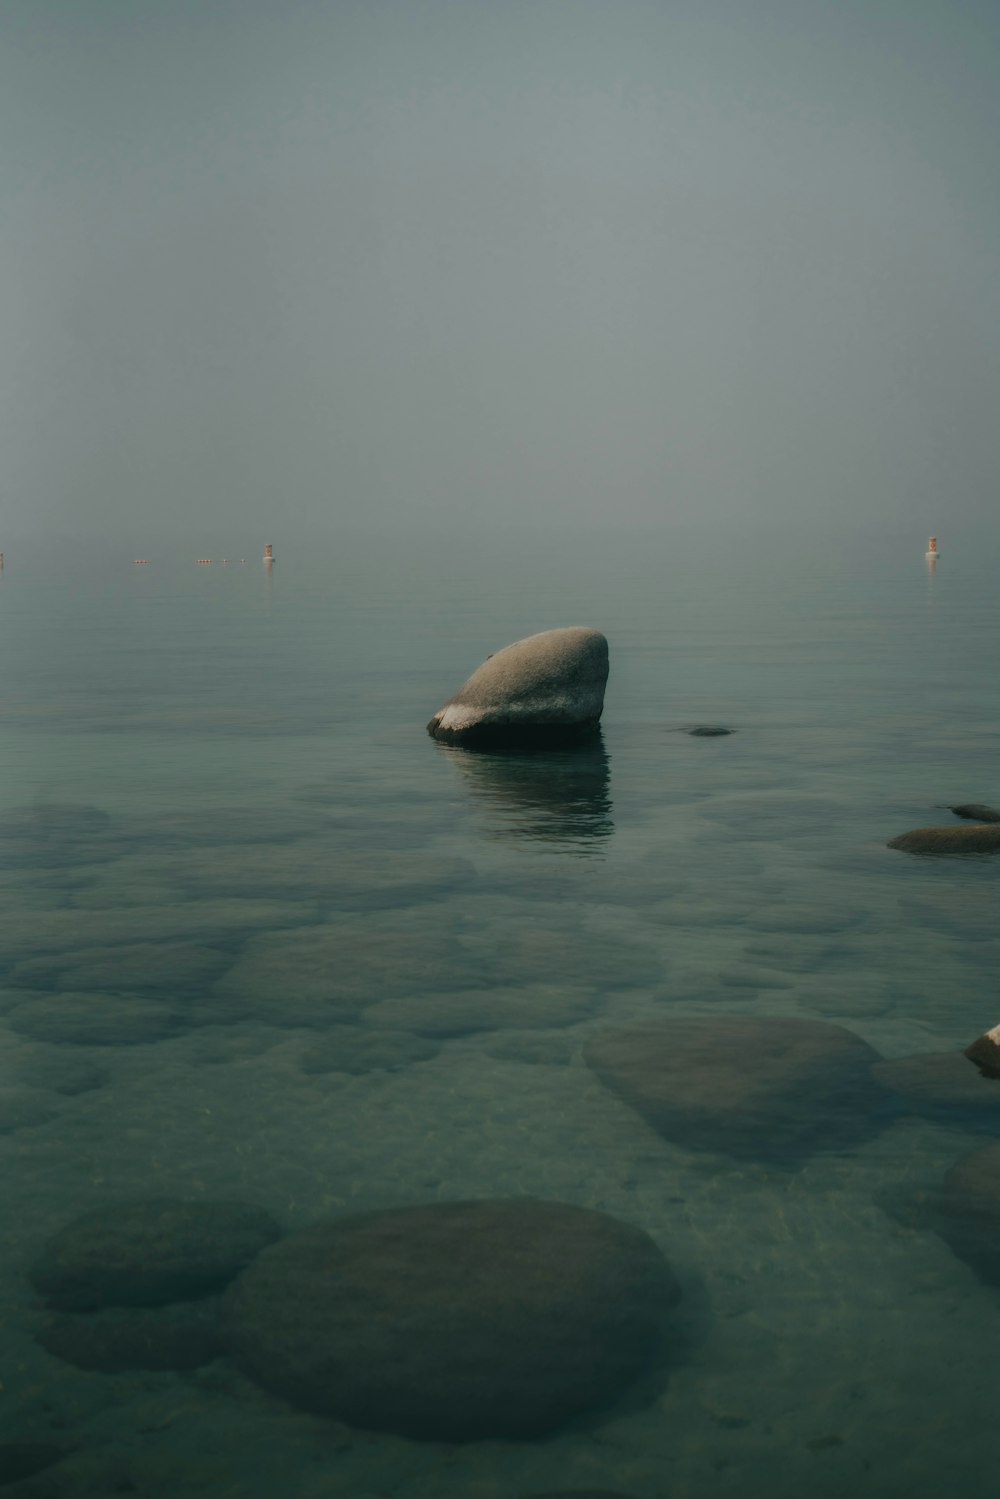 a rock in the middle of a body of water